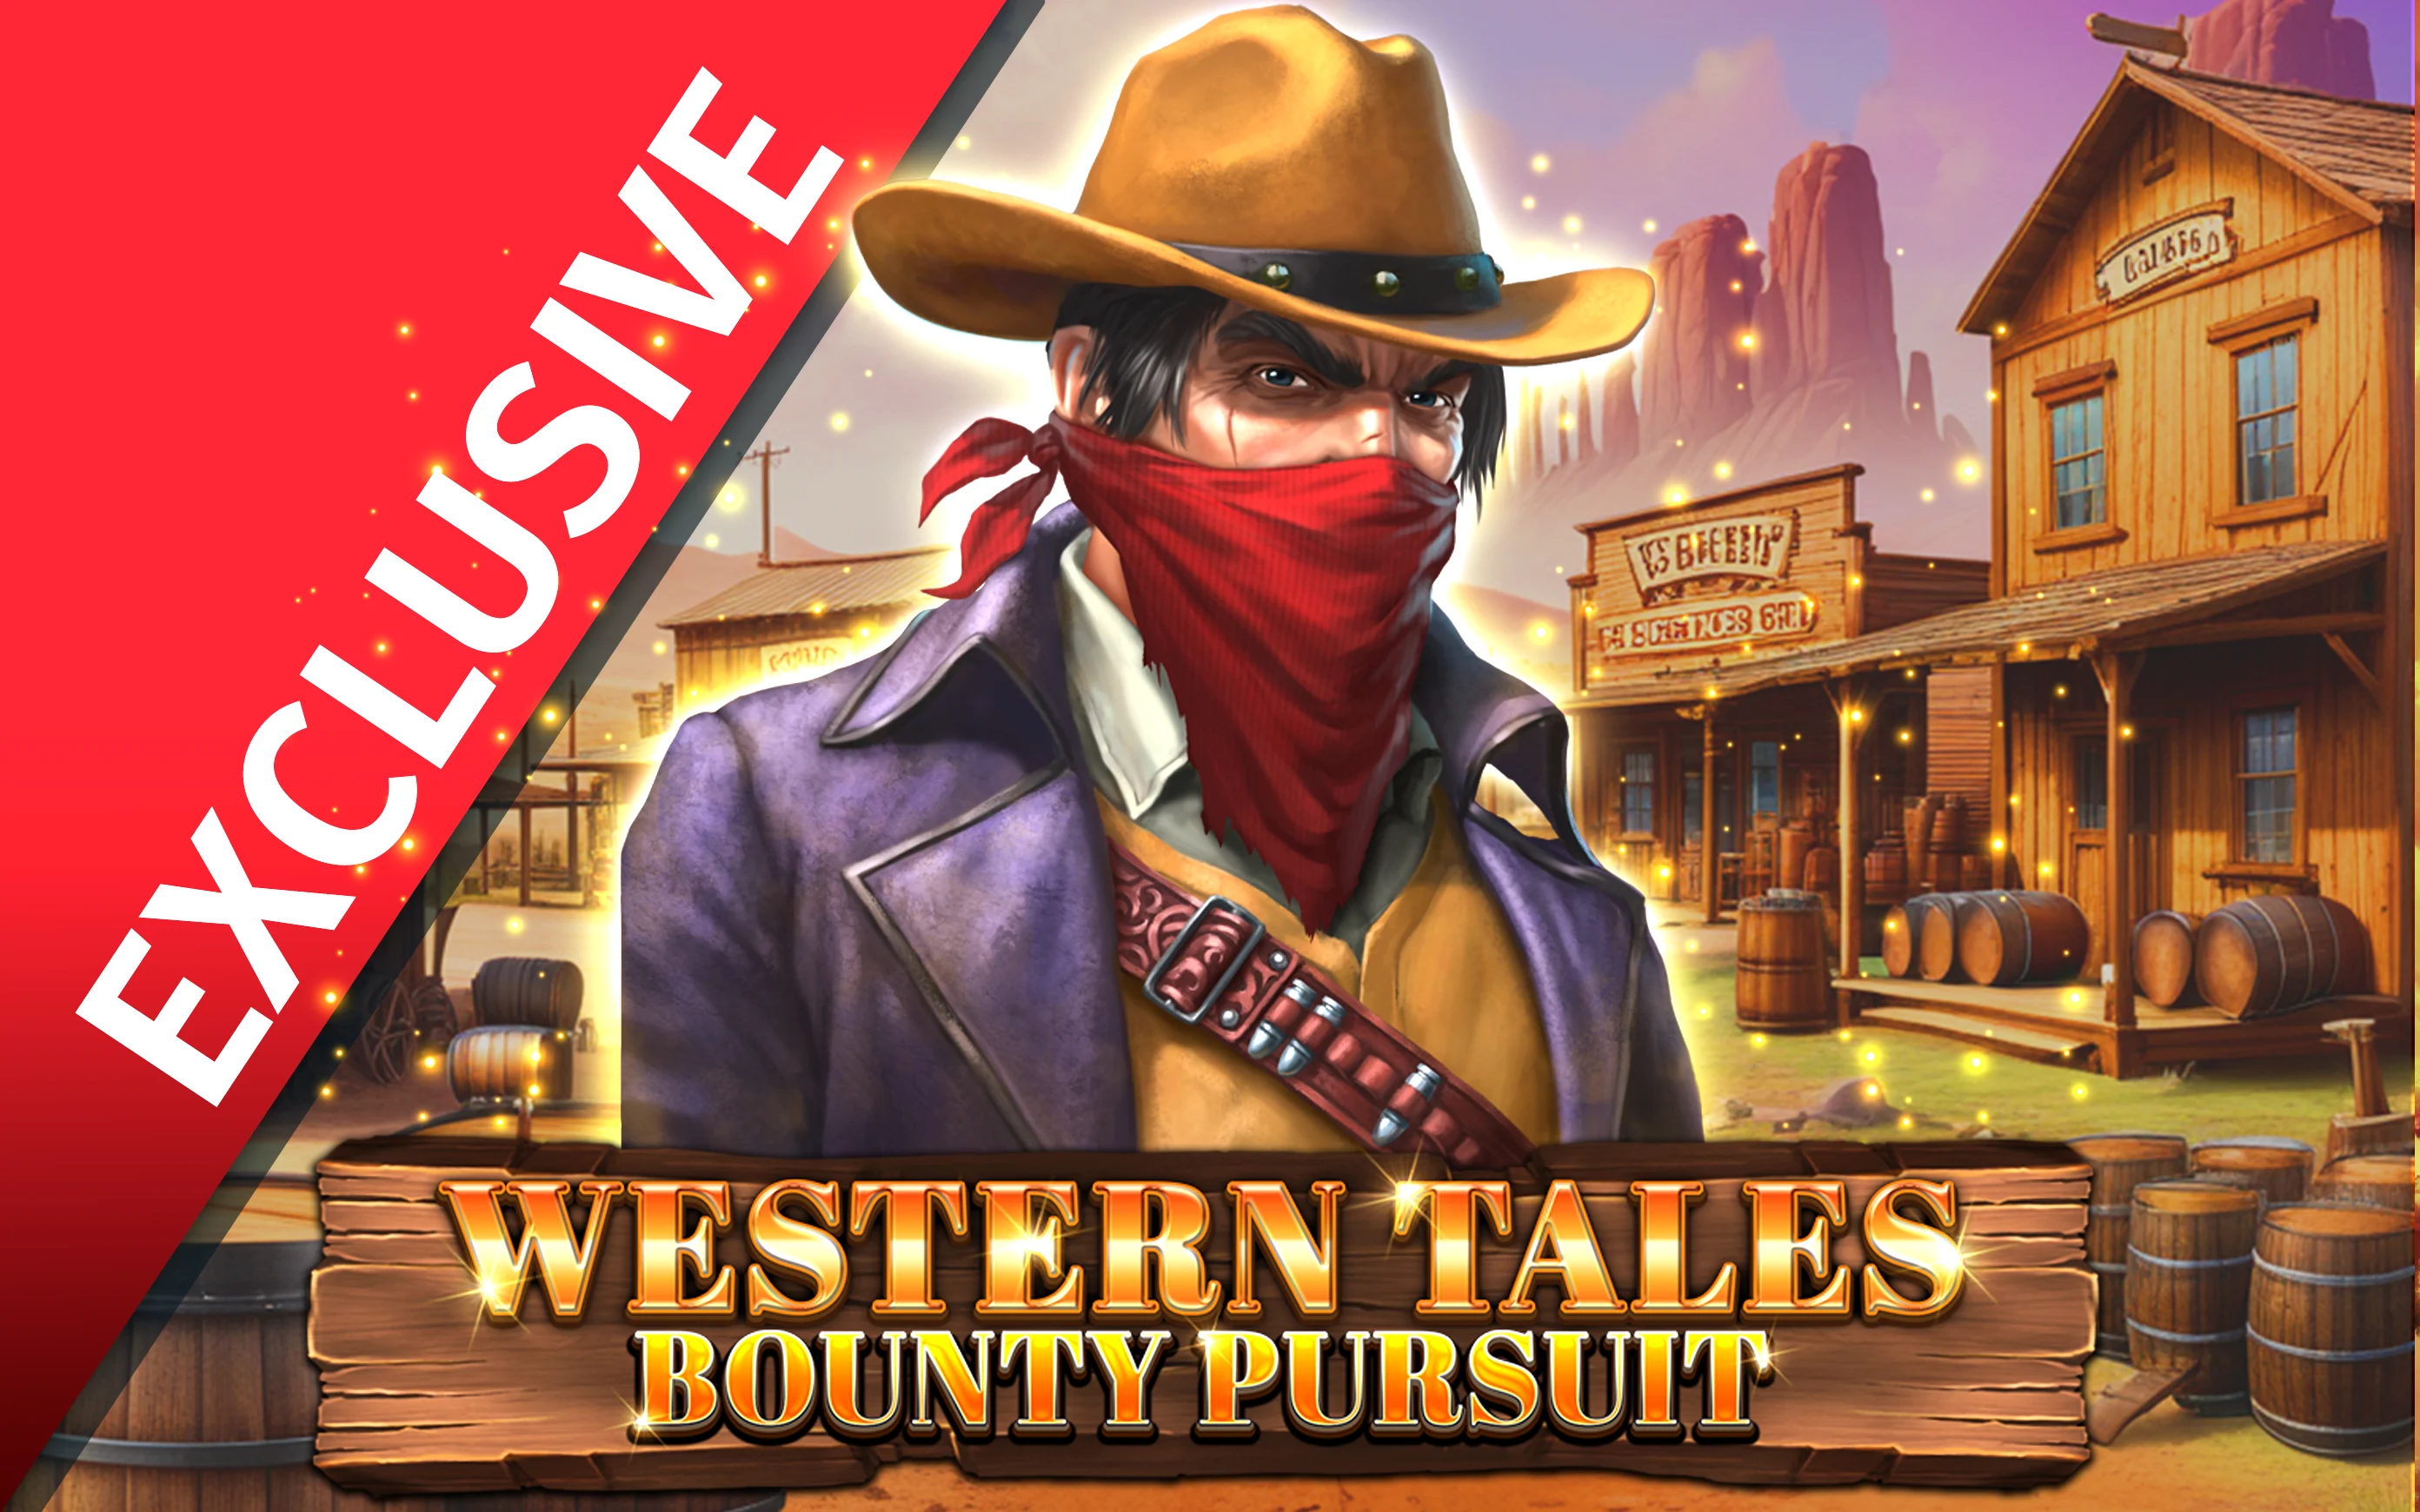 Play Western Tales - Bounty Pursuit on Starcasino.be online casino